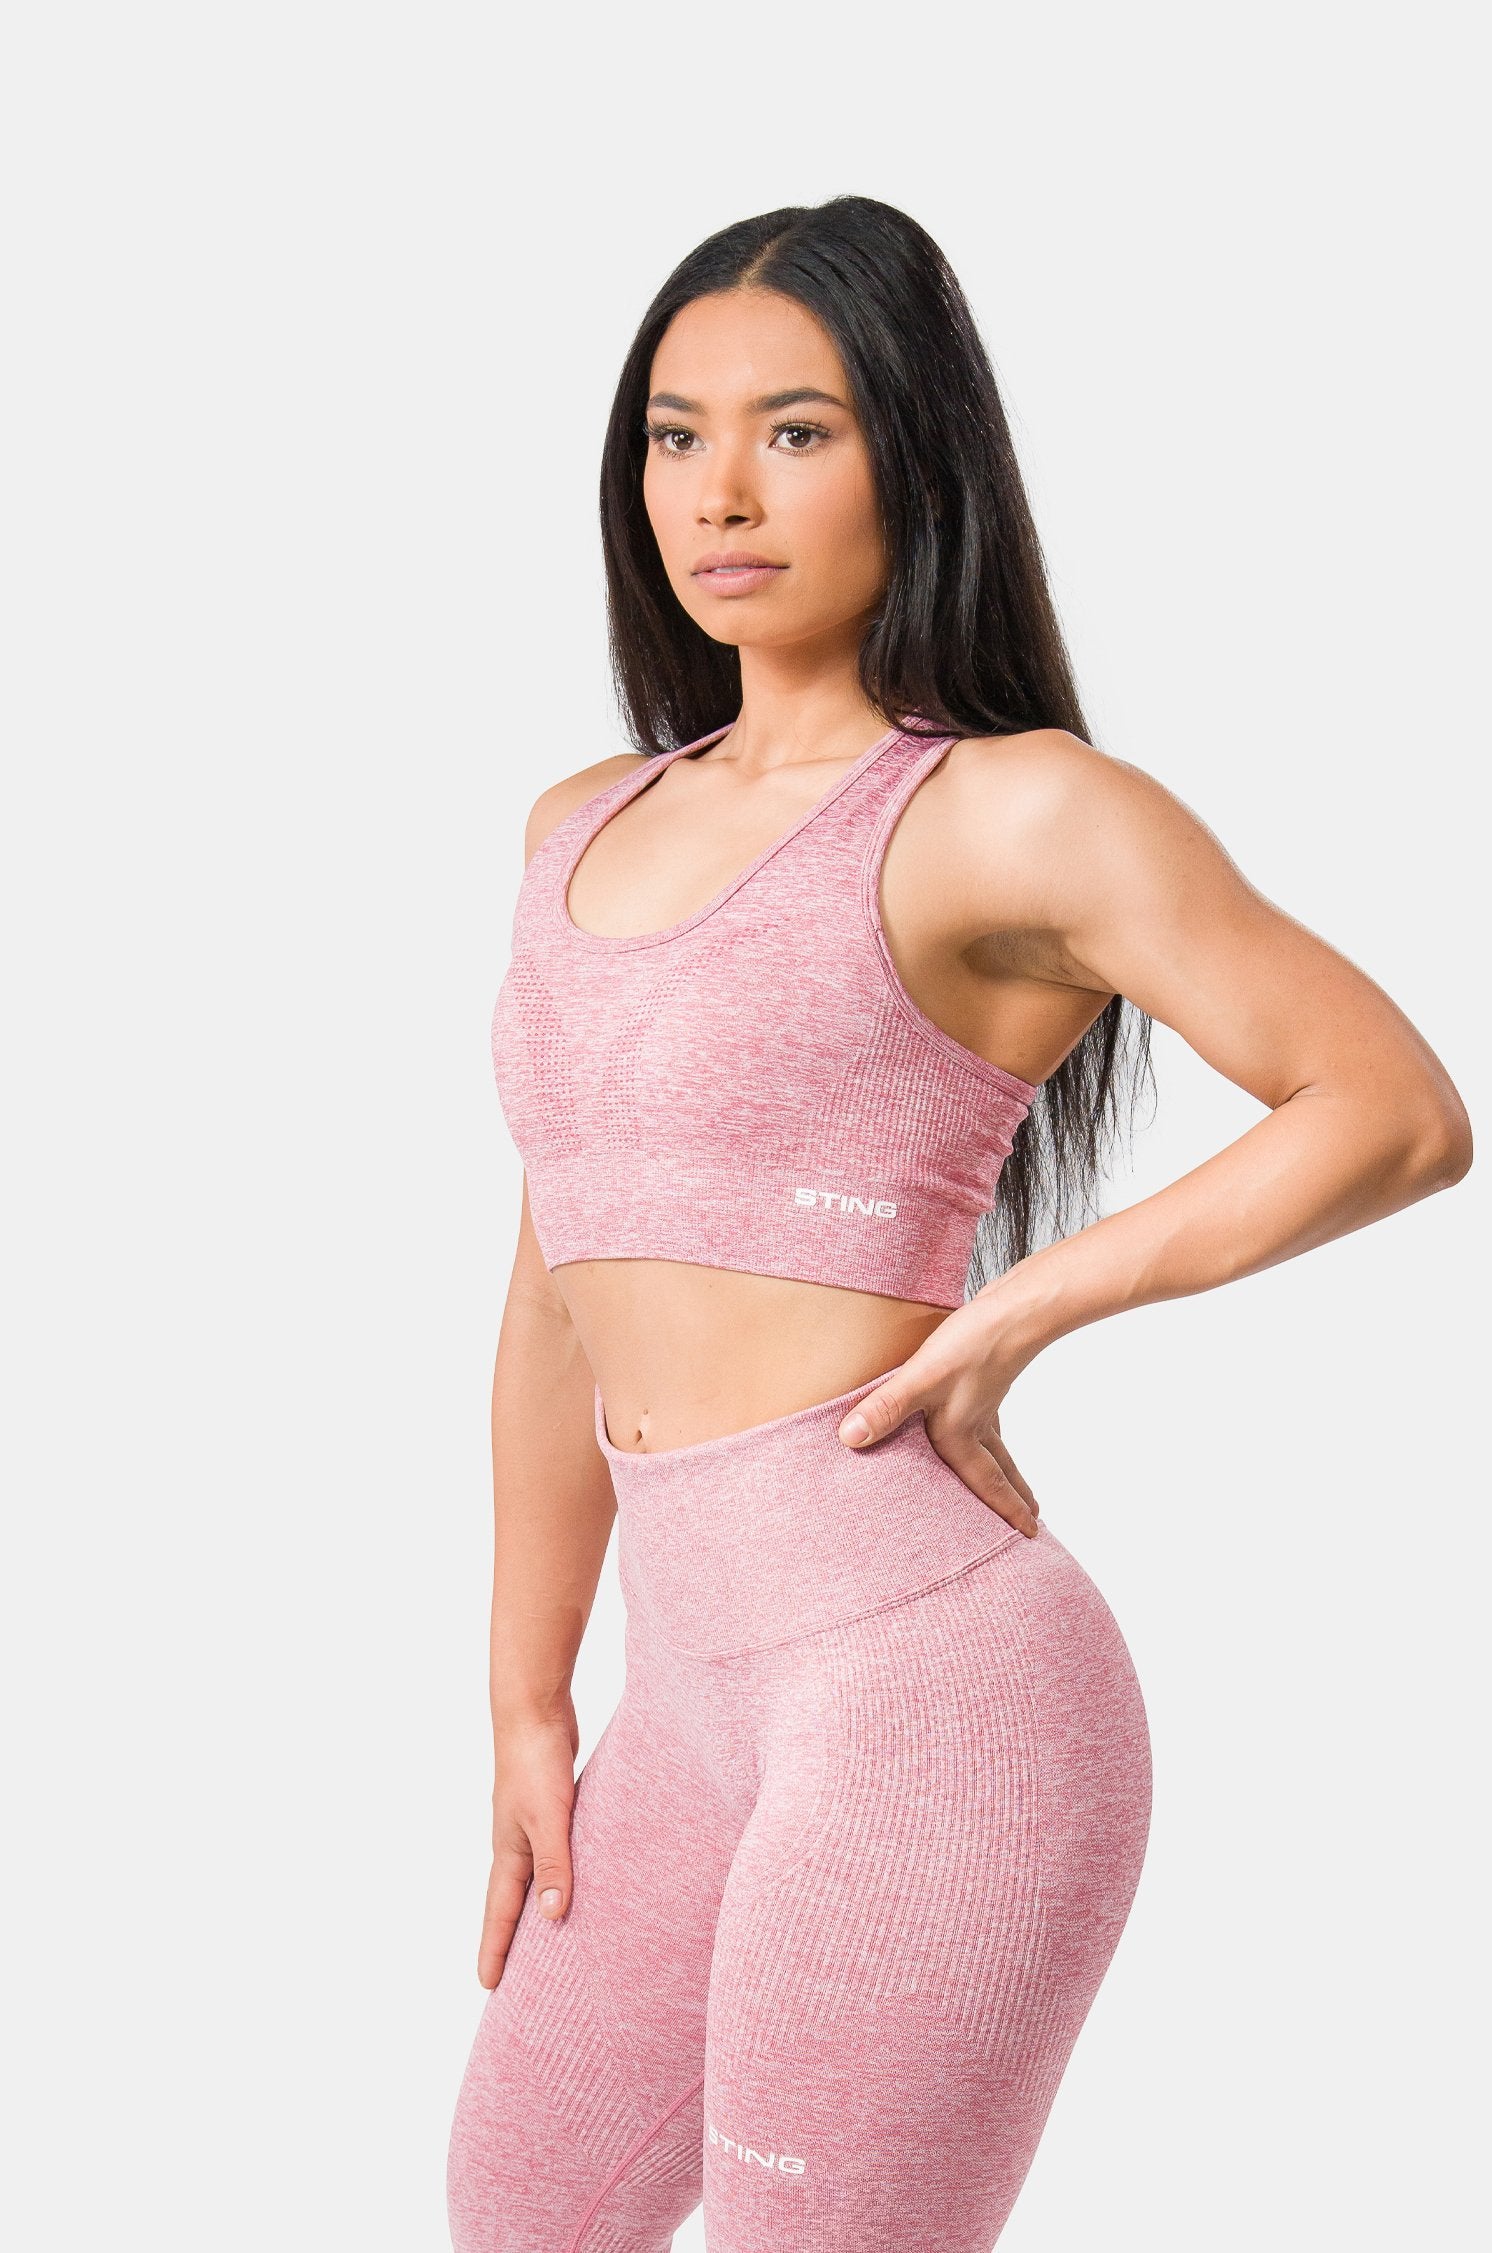 Women's Activewear & Workout Clothes for Women  Sports Wear For Women –  Sting Sports Canada ᵀᴹ